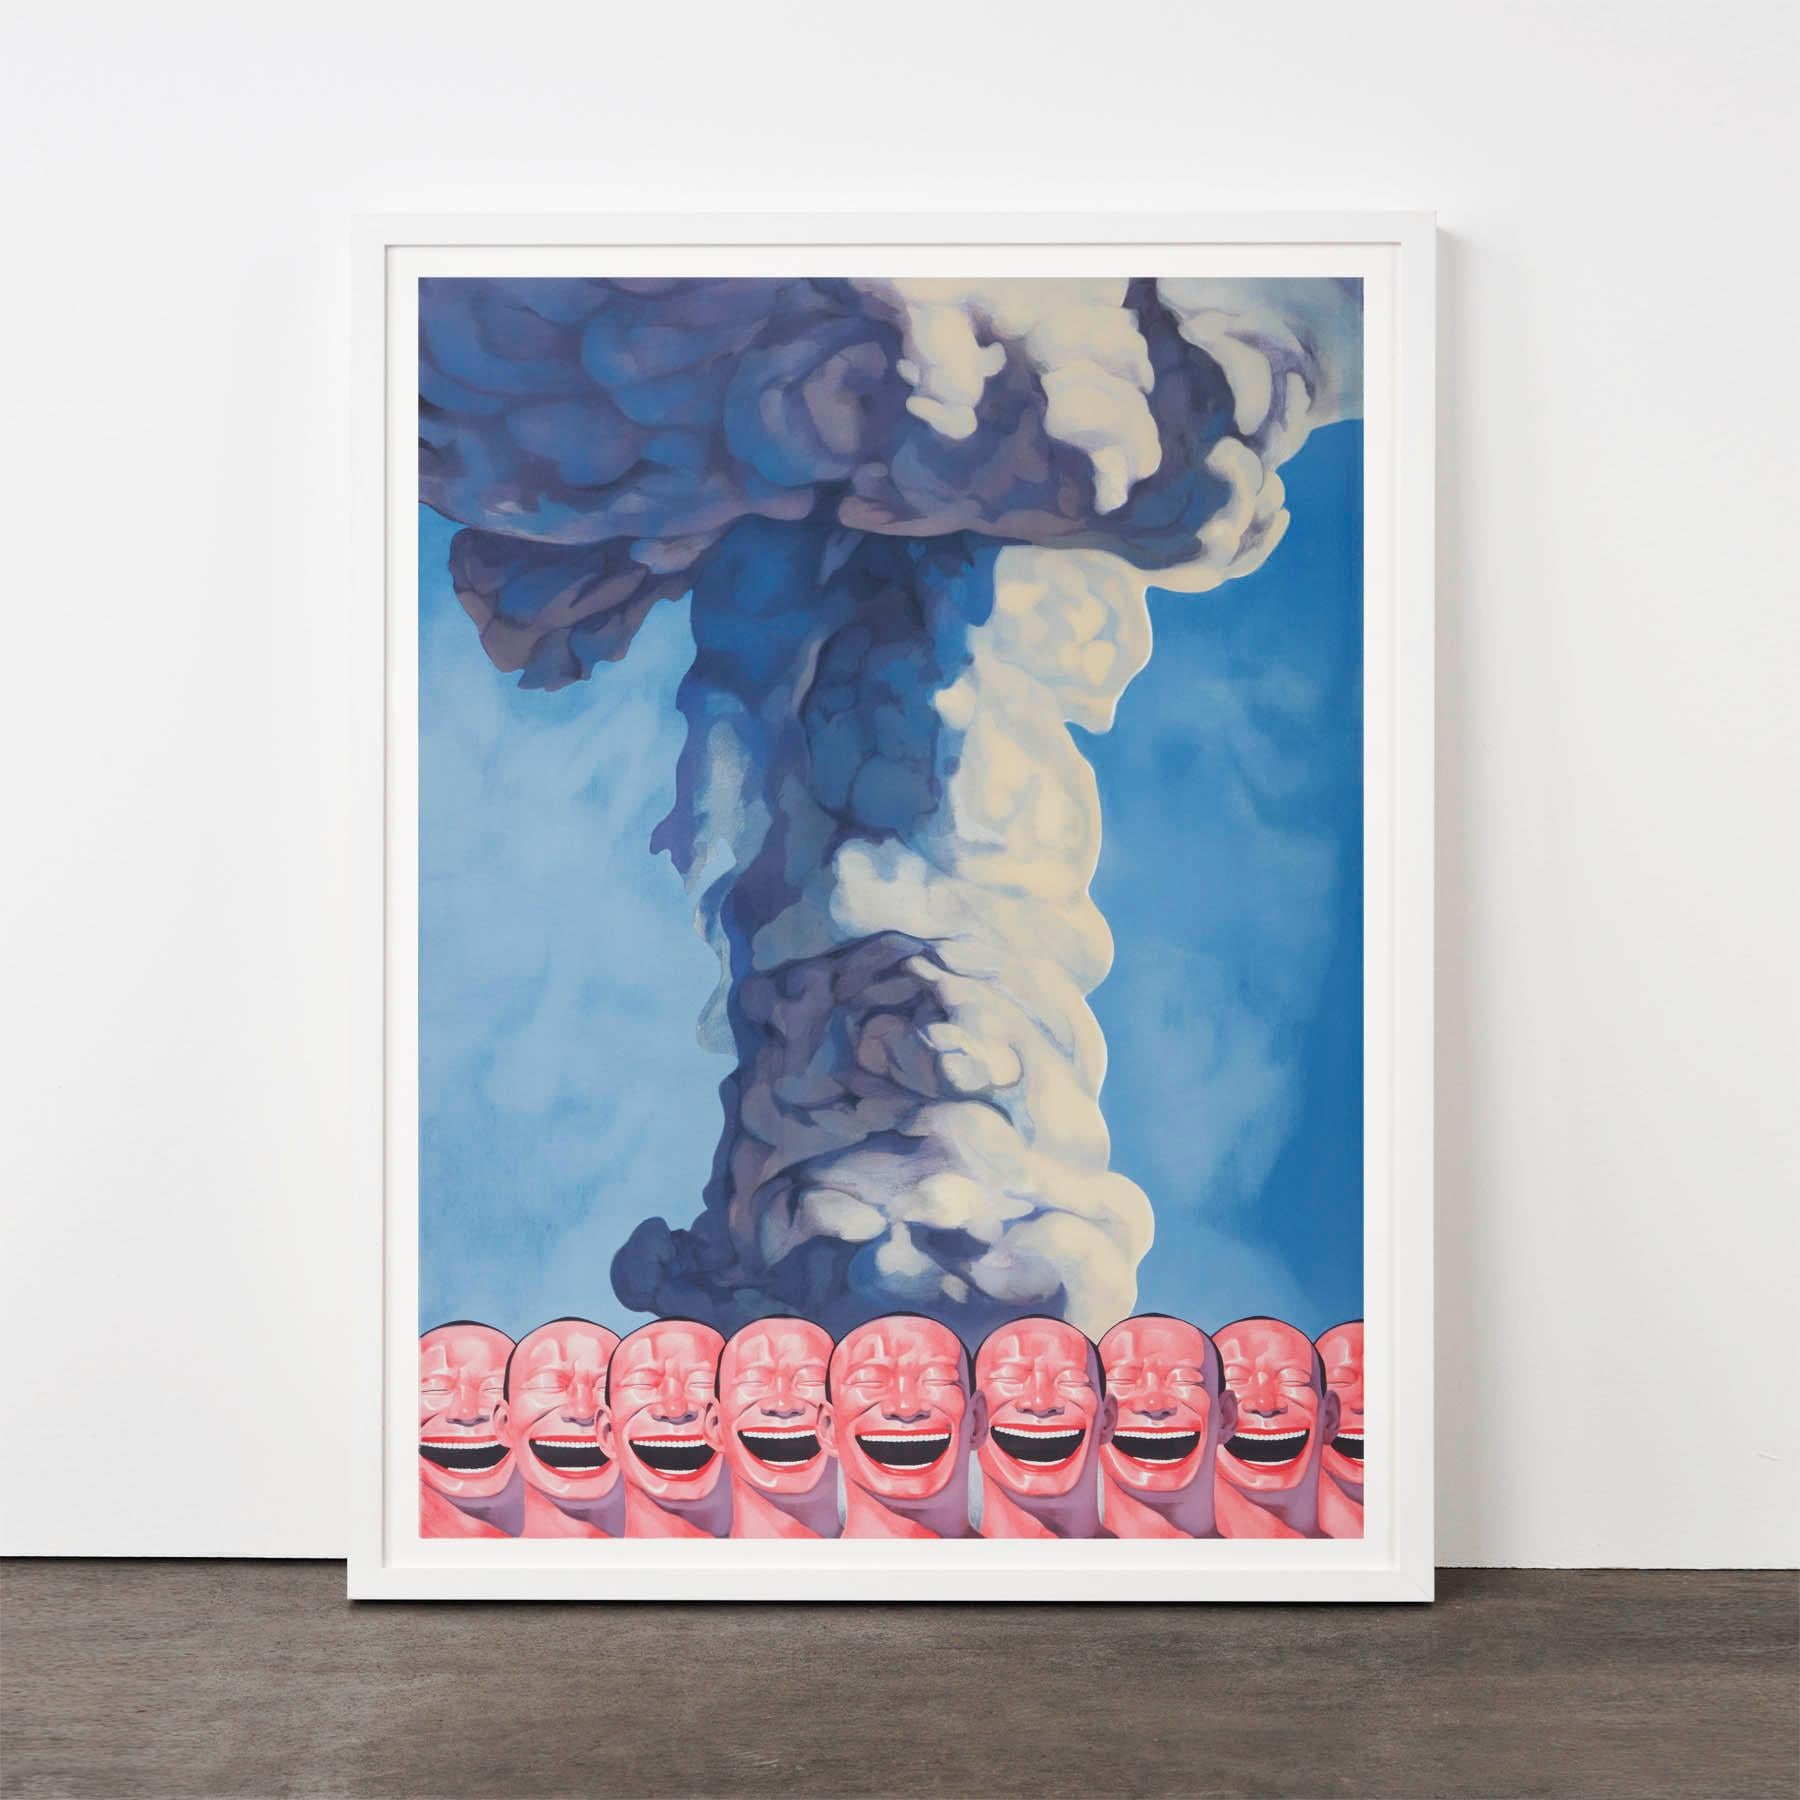 Yue Minjun, Mushroom Cloud
Contemporary, 21st Century, Lithograph, Limited Edition, Chinese
Lithograph
Edition of 130
120 × 80cm (47 1/5 × 31 1/2 in)
Stamped Signature, numbered in Roman numerals
In mint condition, as acquired from the